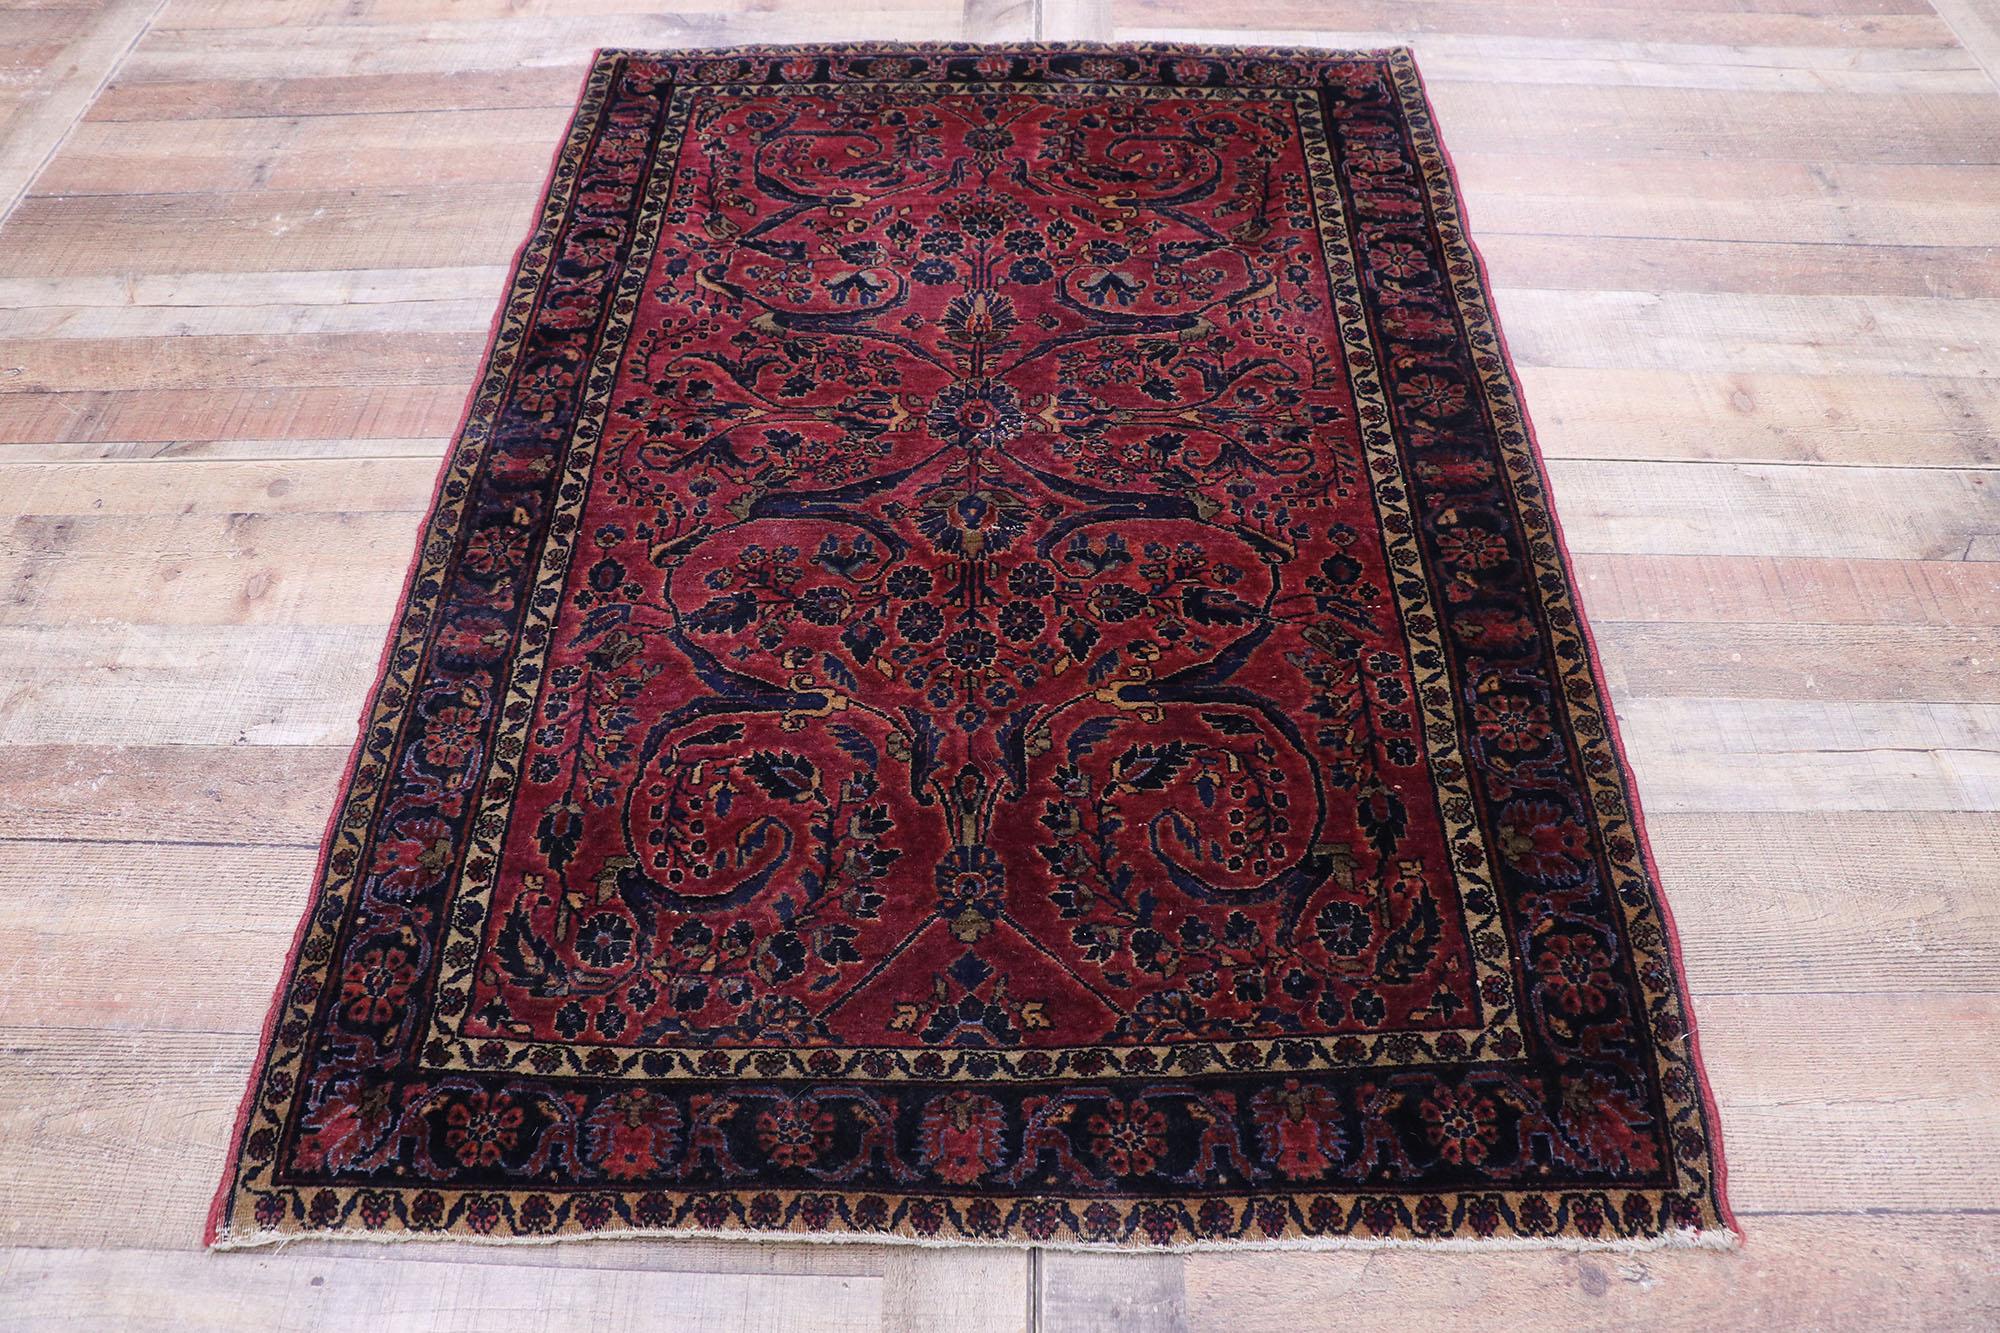 Wool Antique Persian Sarouk Rug with Old World Victorian Style For Sale